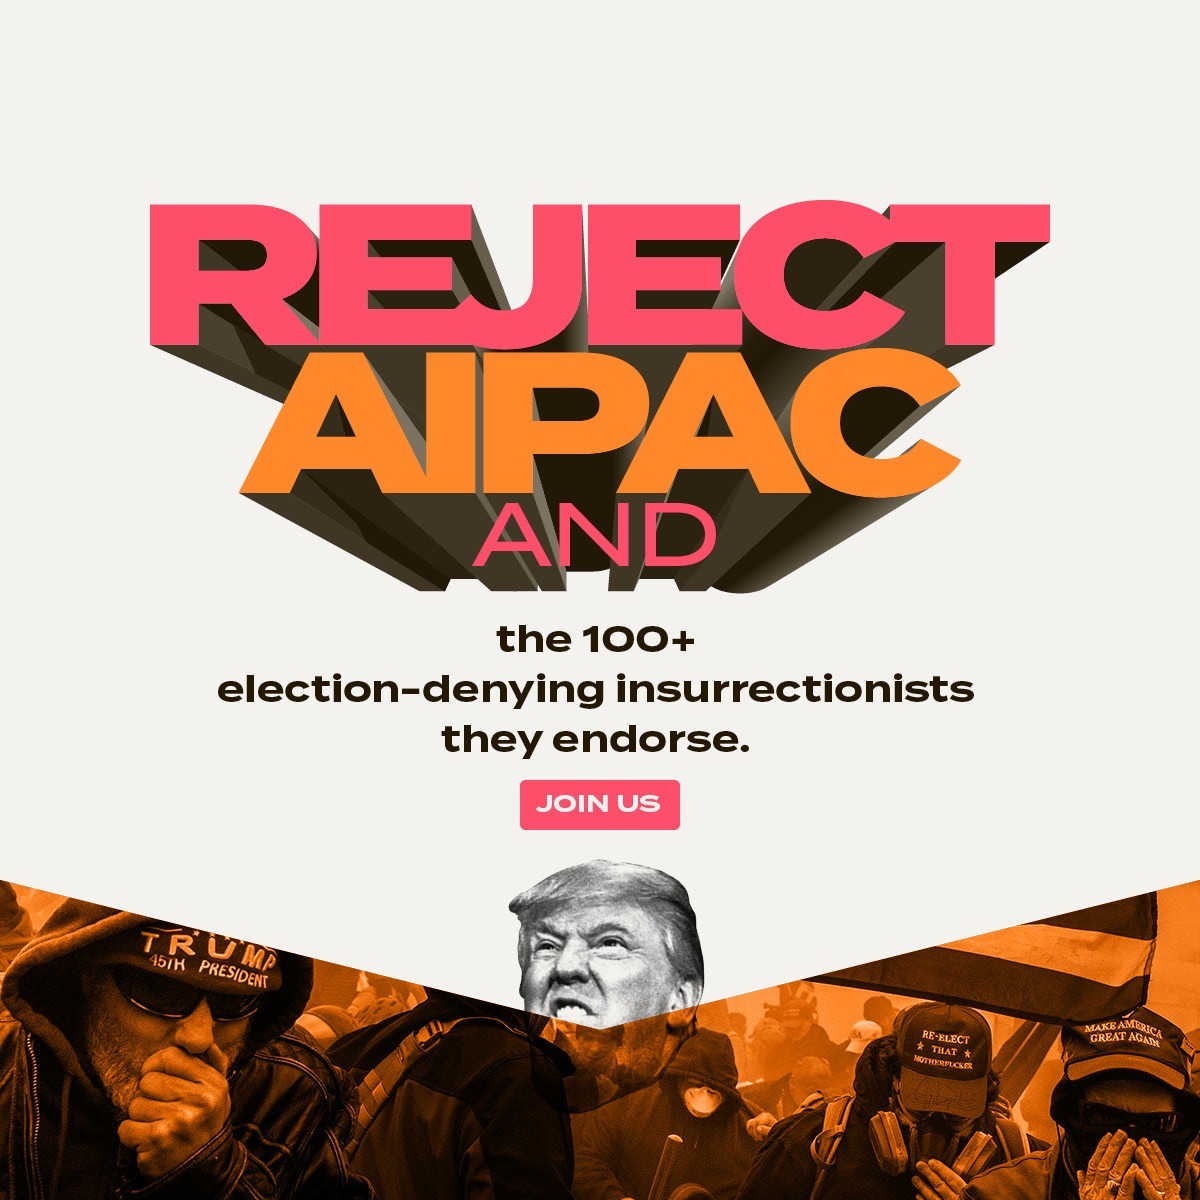 We must protect our democracy from right wing extremists. There is no room in the Democratic party and our democratic primaries for Trump's Republican mega donors and those sympathizing with Jan 6 insurrectionists. We must take a stand and firmly say we #RejectAIPAC.